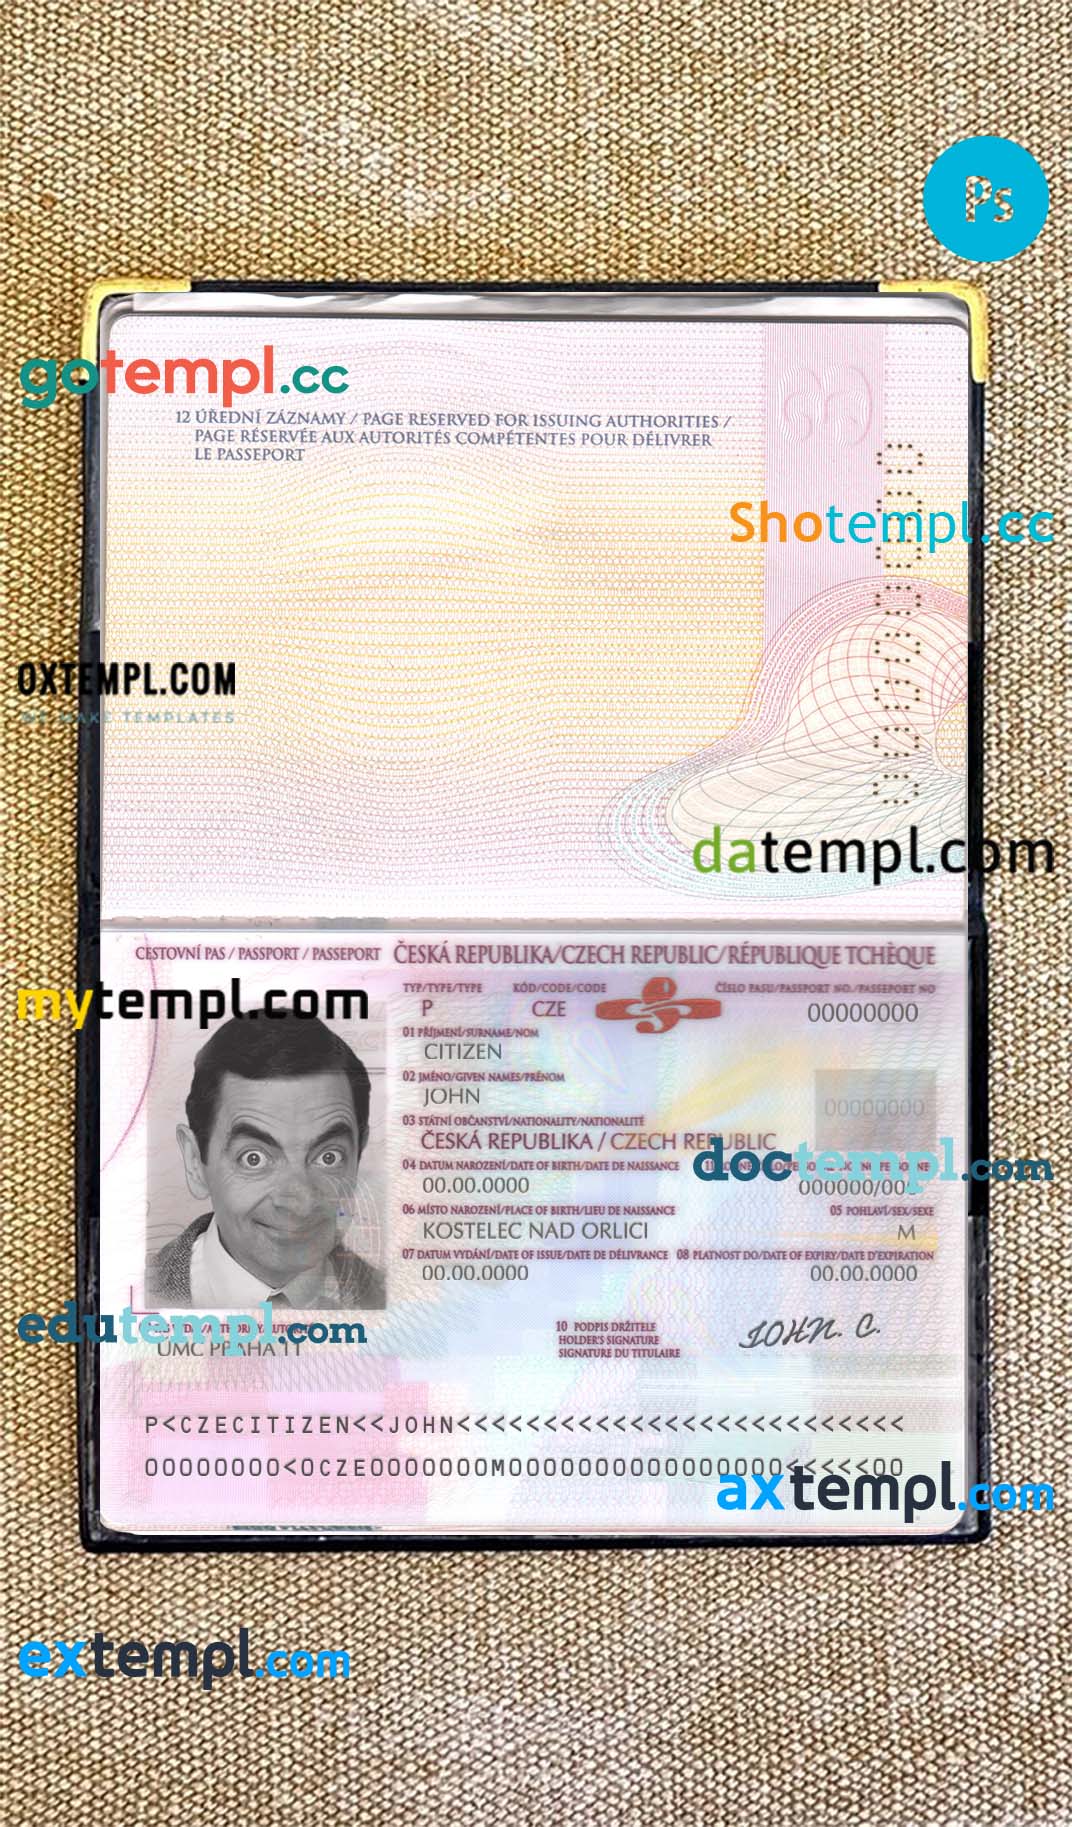 Canada passport editable PSD files, scan and photo taken image (2010-present), 2 in 1